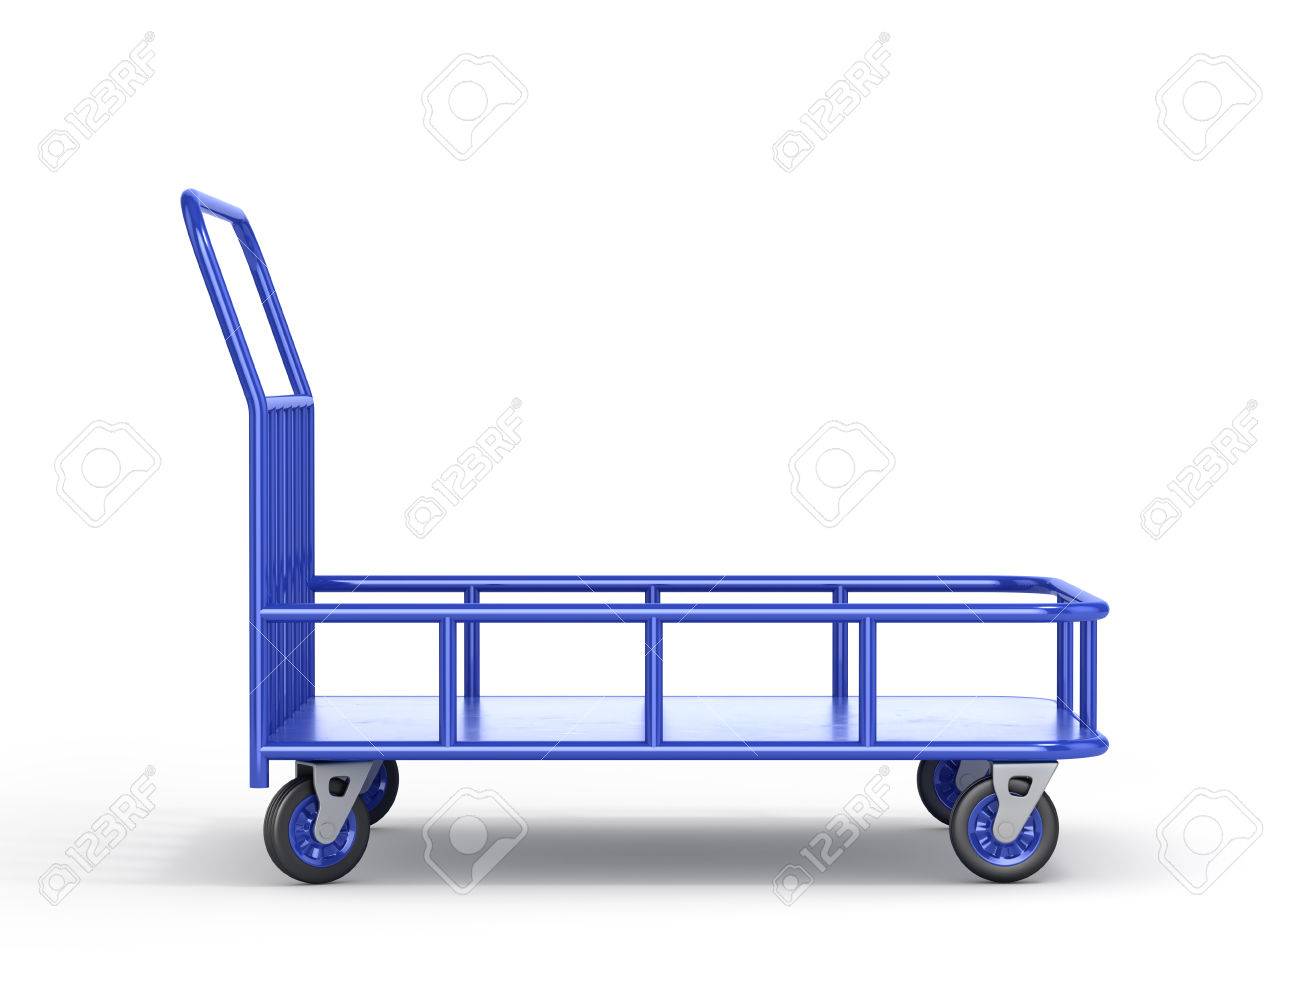 How to select the Right Type of Industrial Trolley for your unit?